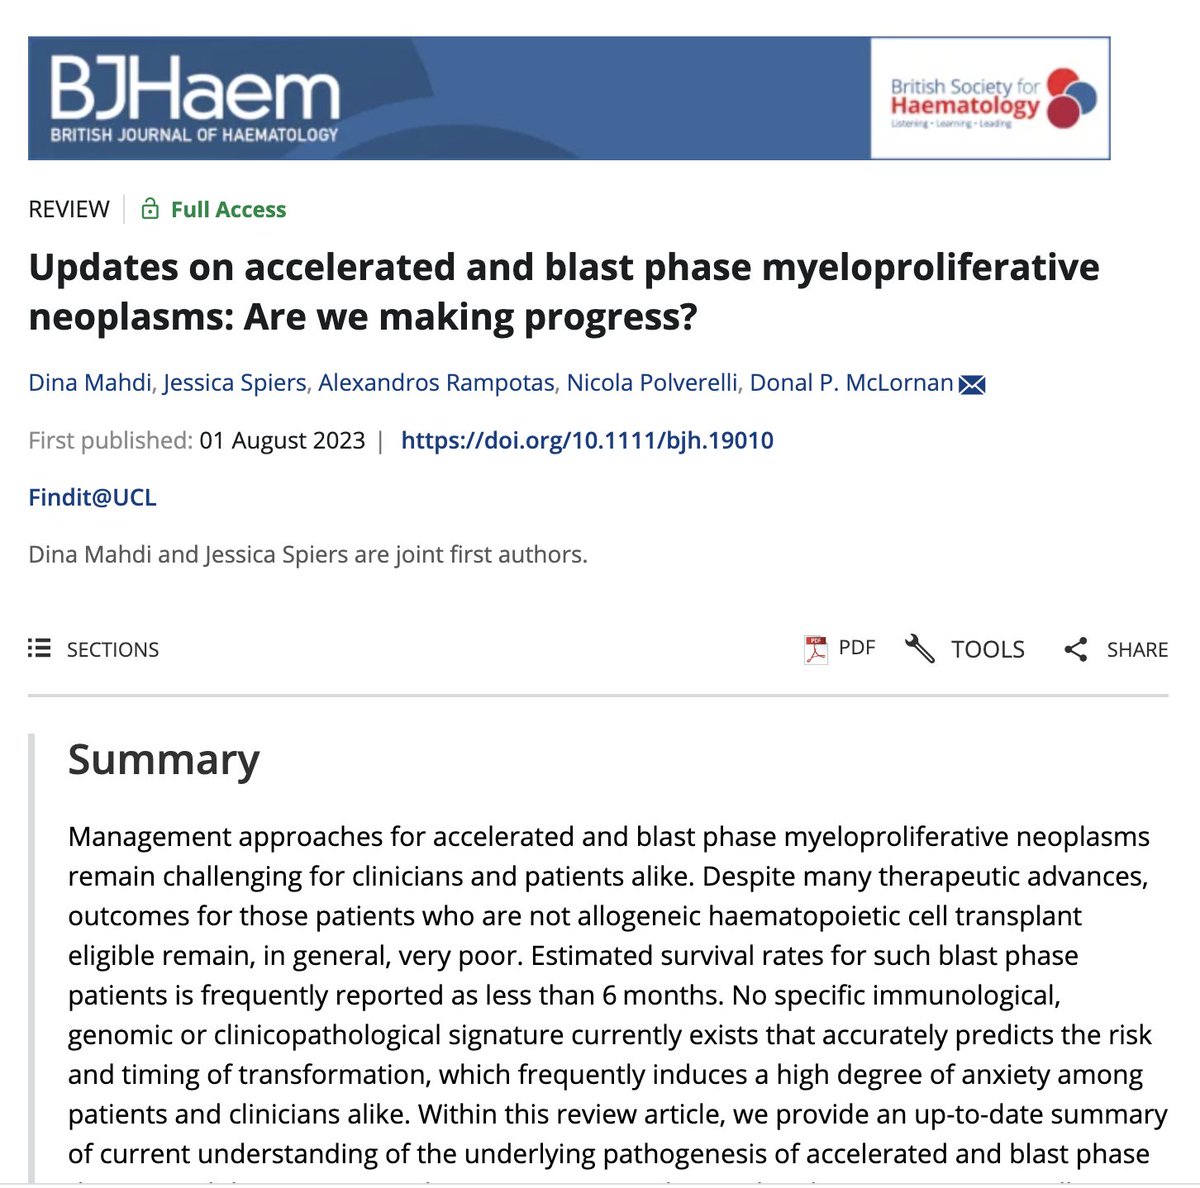 Very pleased to have contributed to this excellent review on blast phase Myelofibrosis led by @DrLornan onlinelibrary.wiley.com/journal/136521… Here, we try to depict the molecular underworks of myelofibrosis progression towards blast phase. Still much to learn and do #MedTwitter @BrJHaem